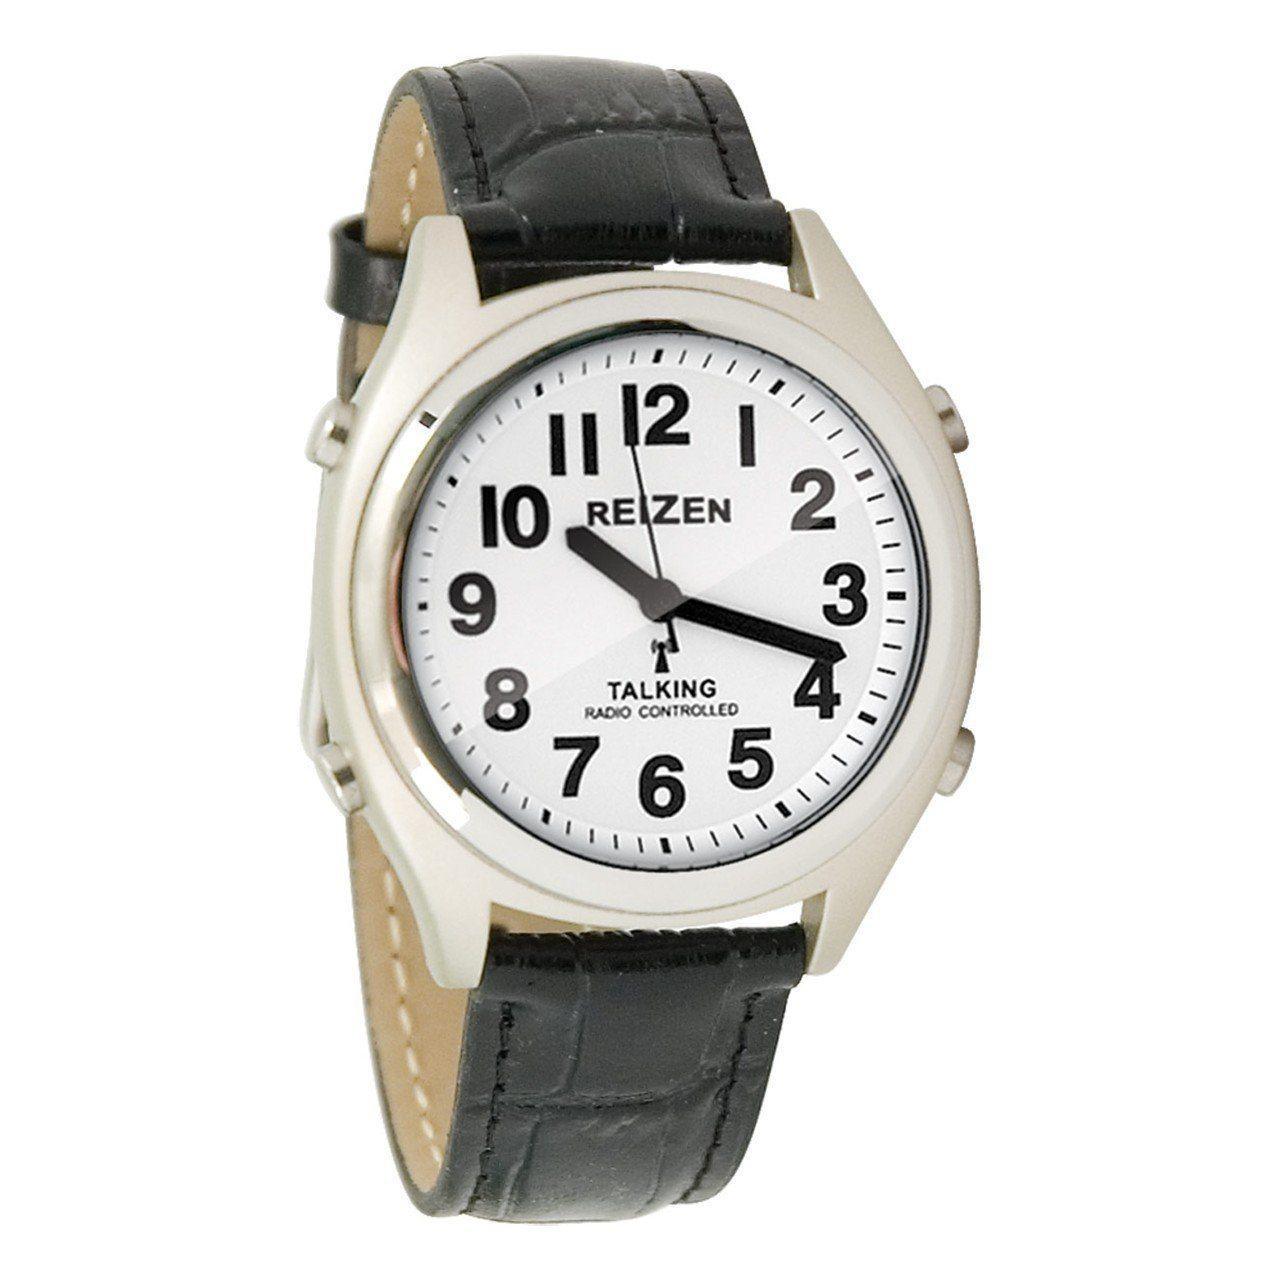 Talking Atomic Watch - White Face-Black Numbers-Leather and Expansion Band - The Low Vision Store